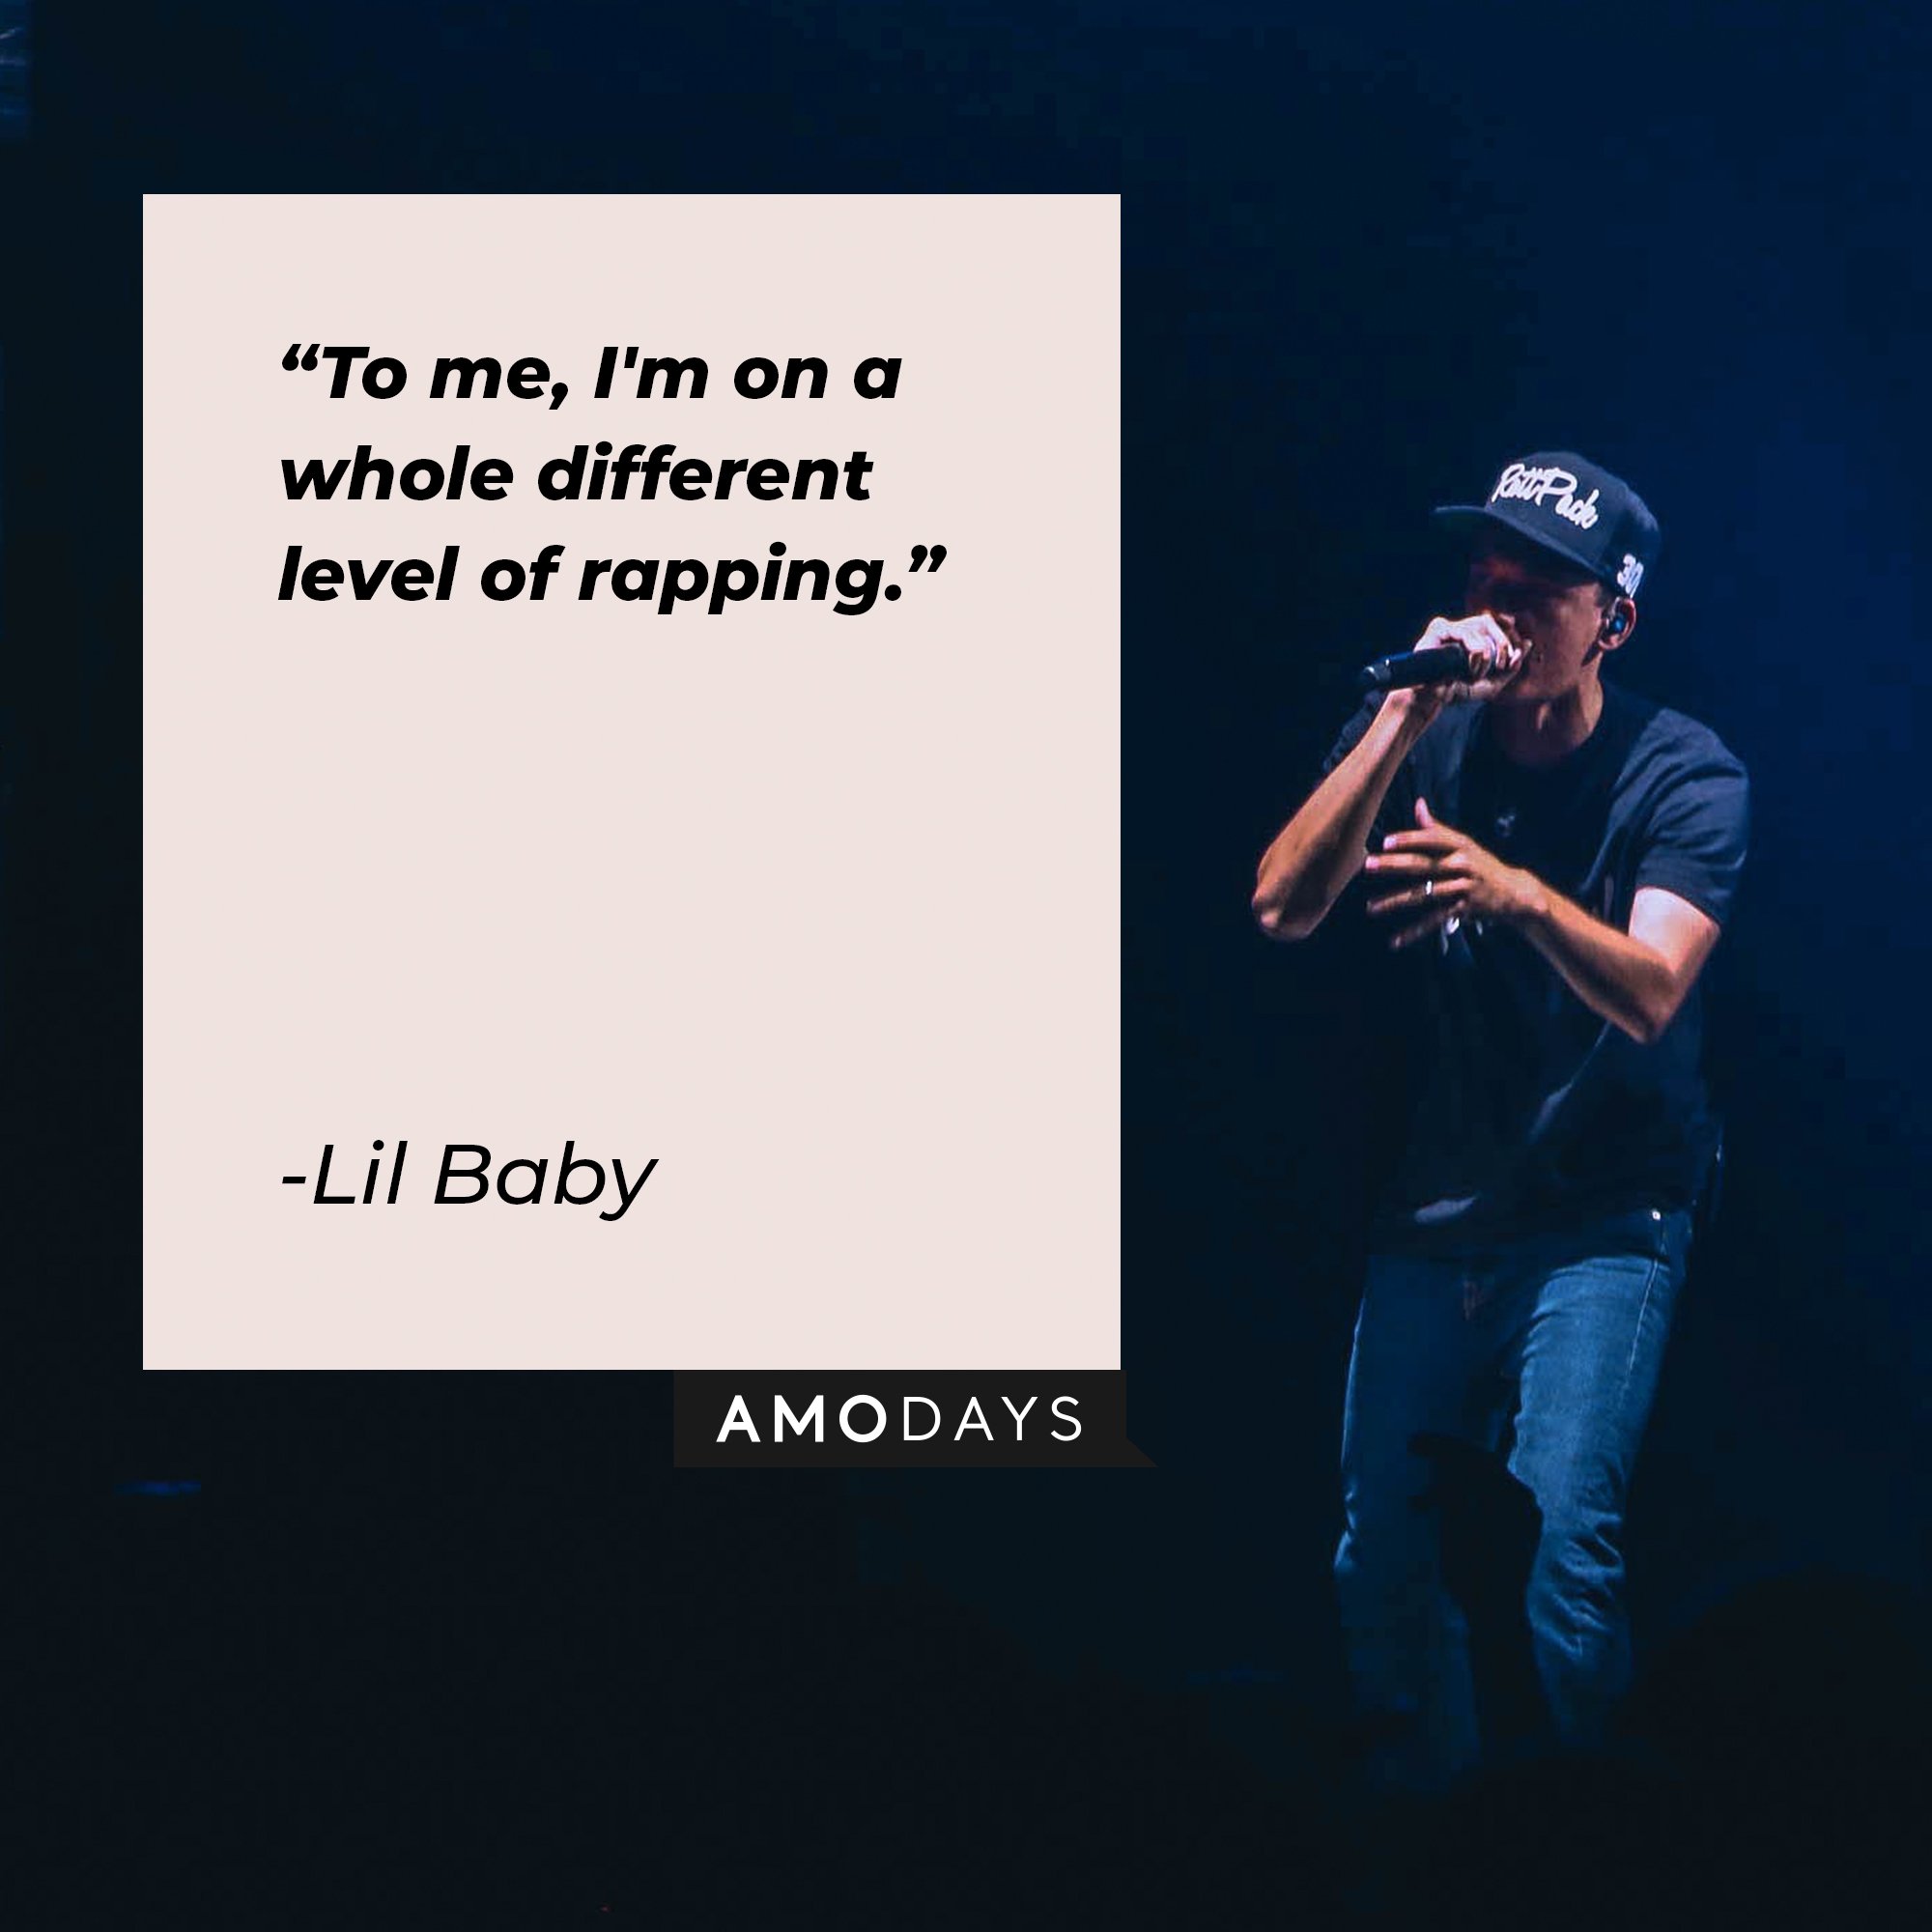 Lil Baby’s quote: "To me, I'm on a whole different level of rapping." | Image: AmoDays